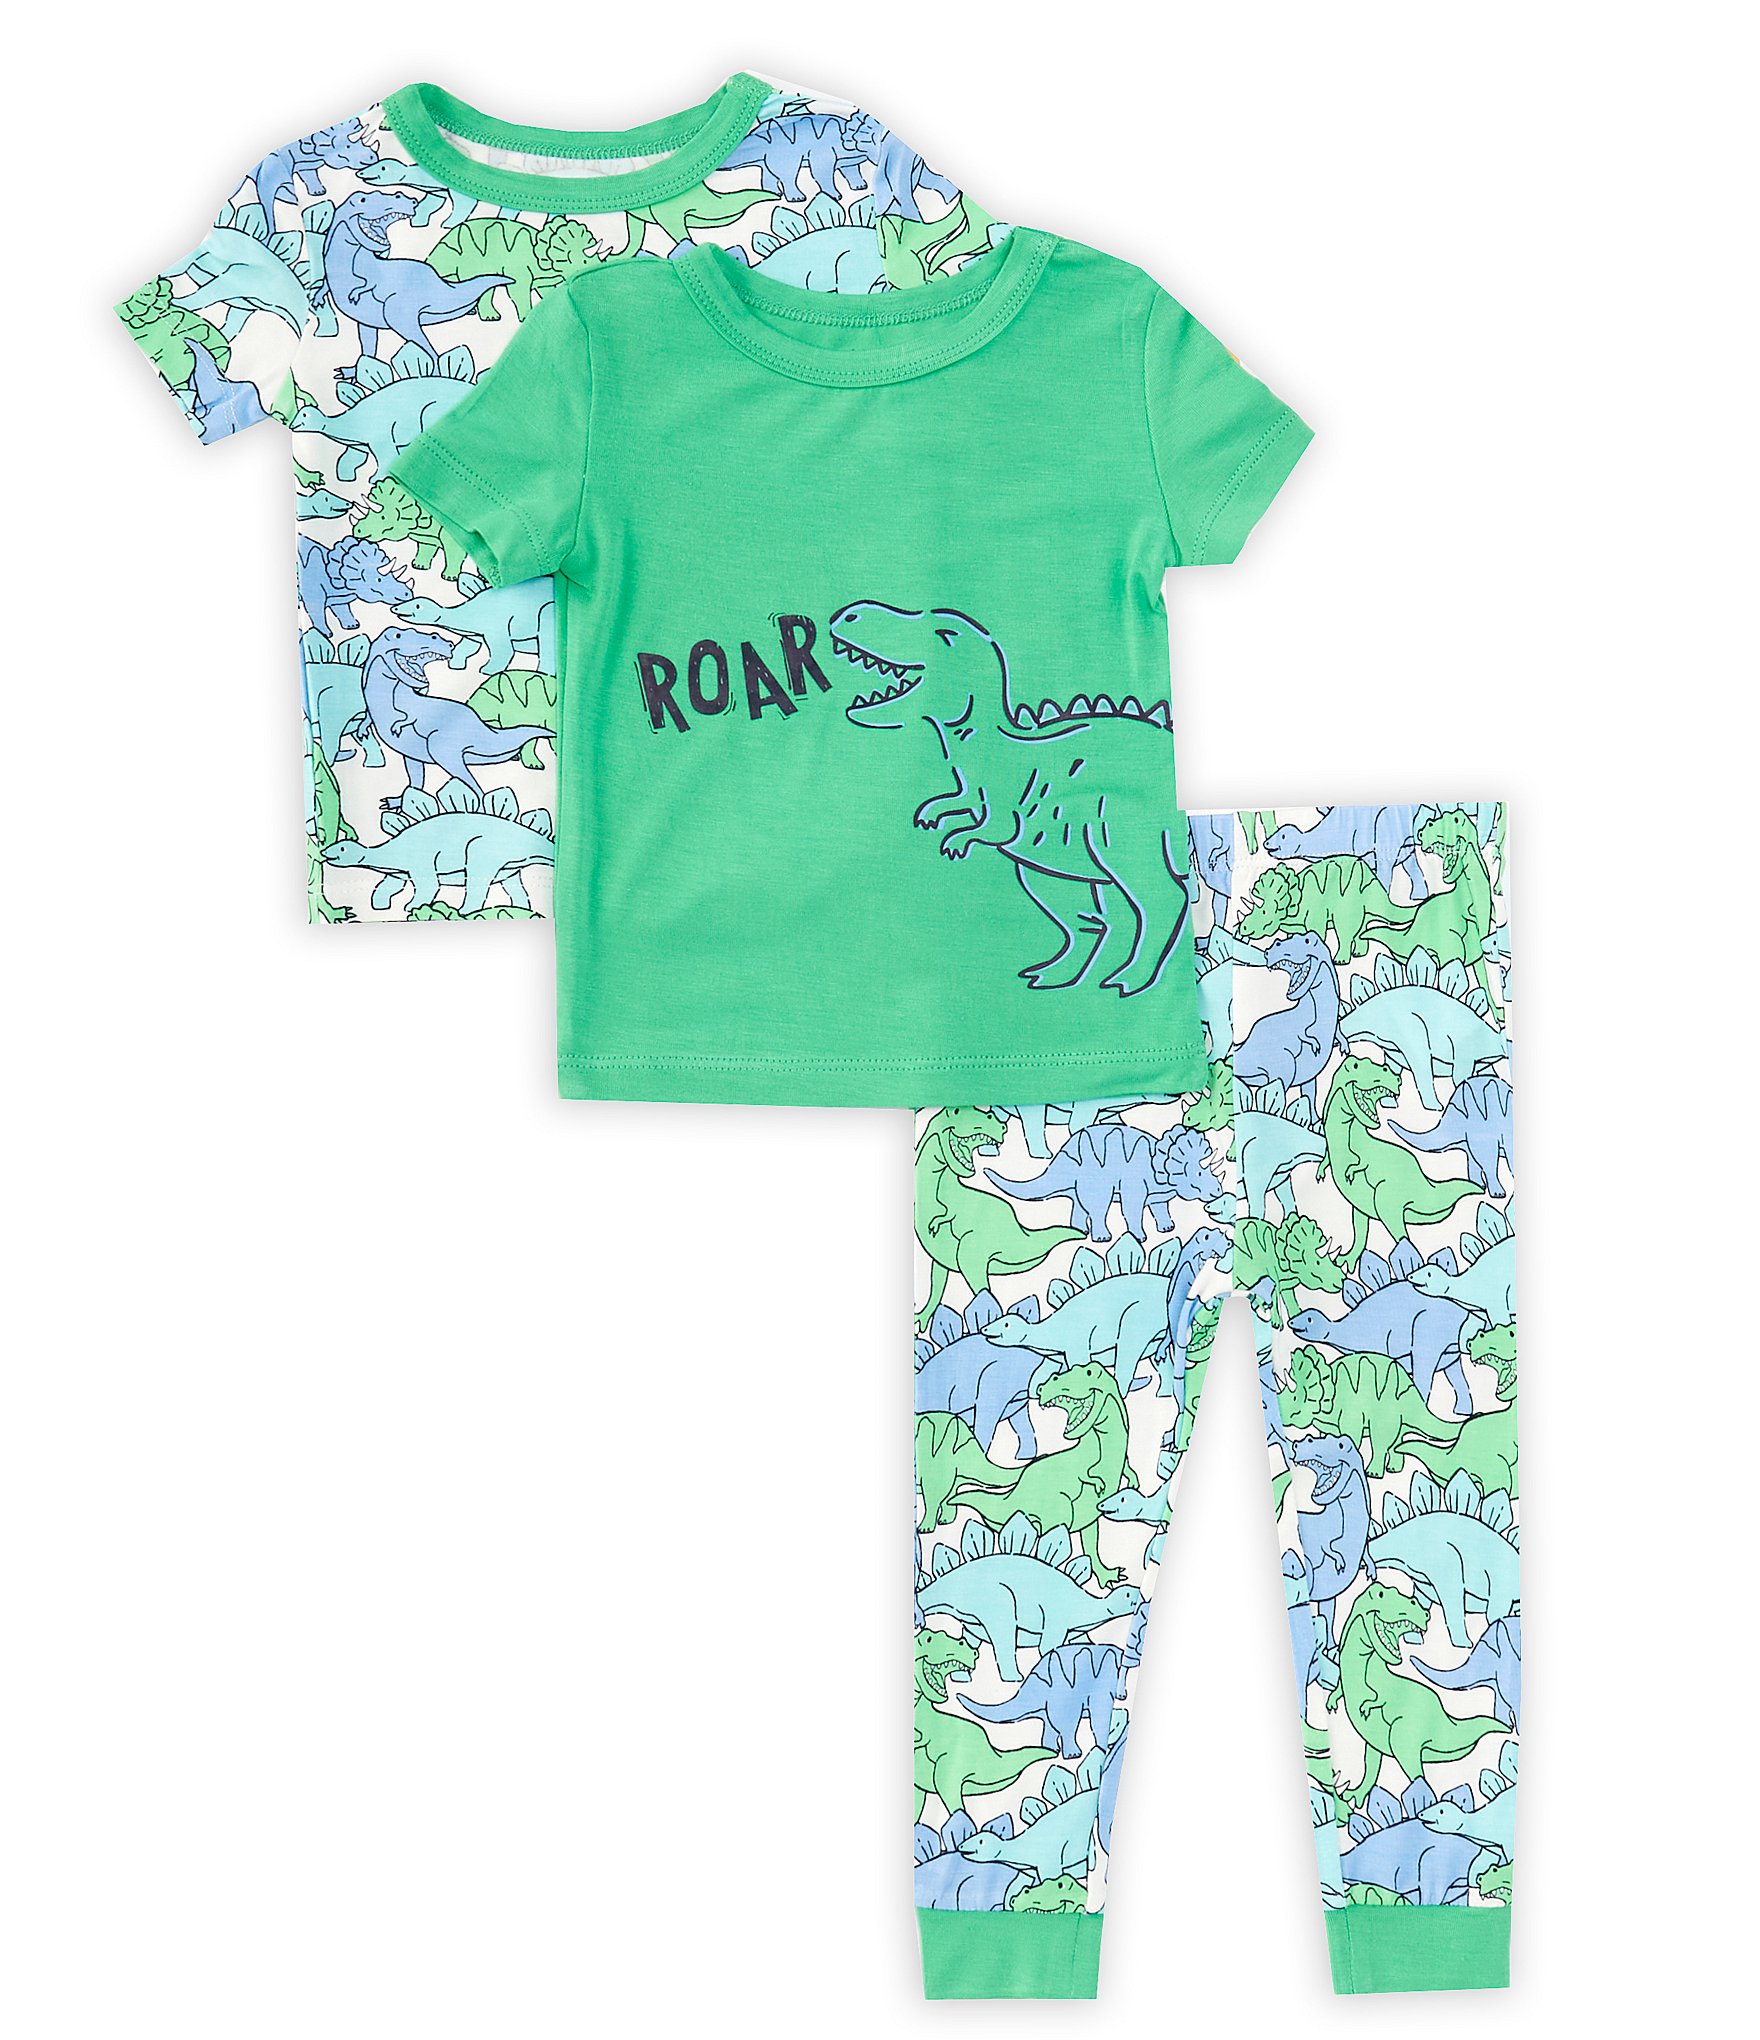 Burt's Bees Baby 12-24 Months Being A Bunny T-Shirt & Pant Pajama